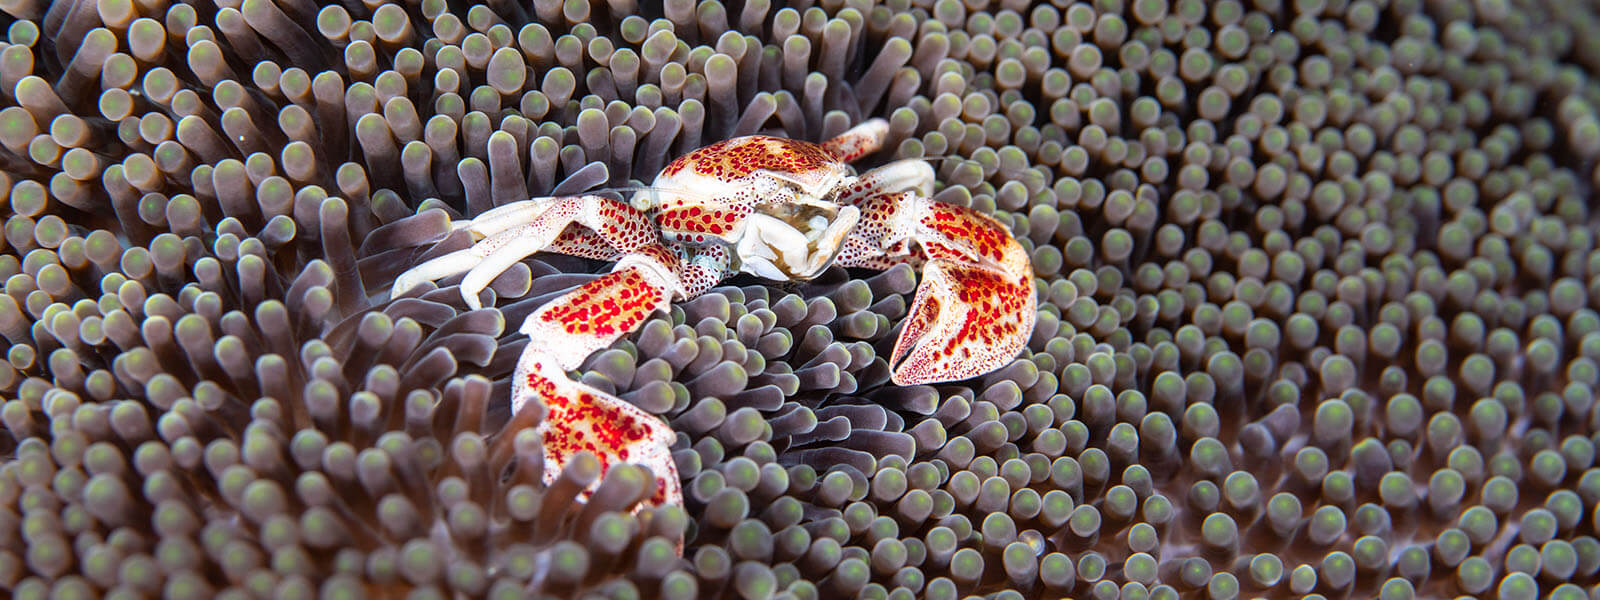 We see porcelain crabs on our snorkeling tour to the Heart of the Coral Triangle